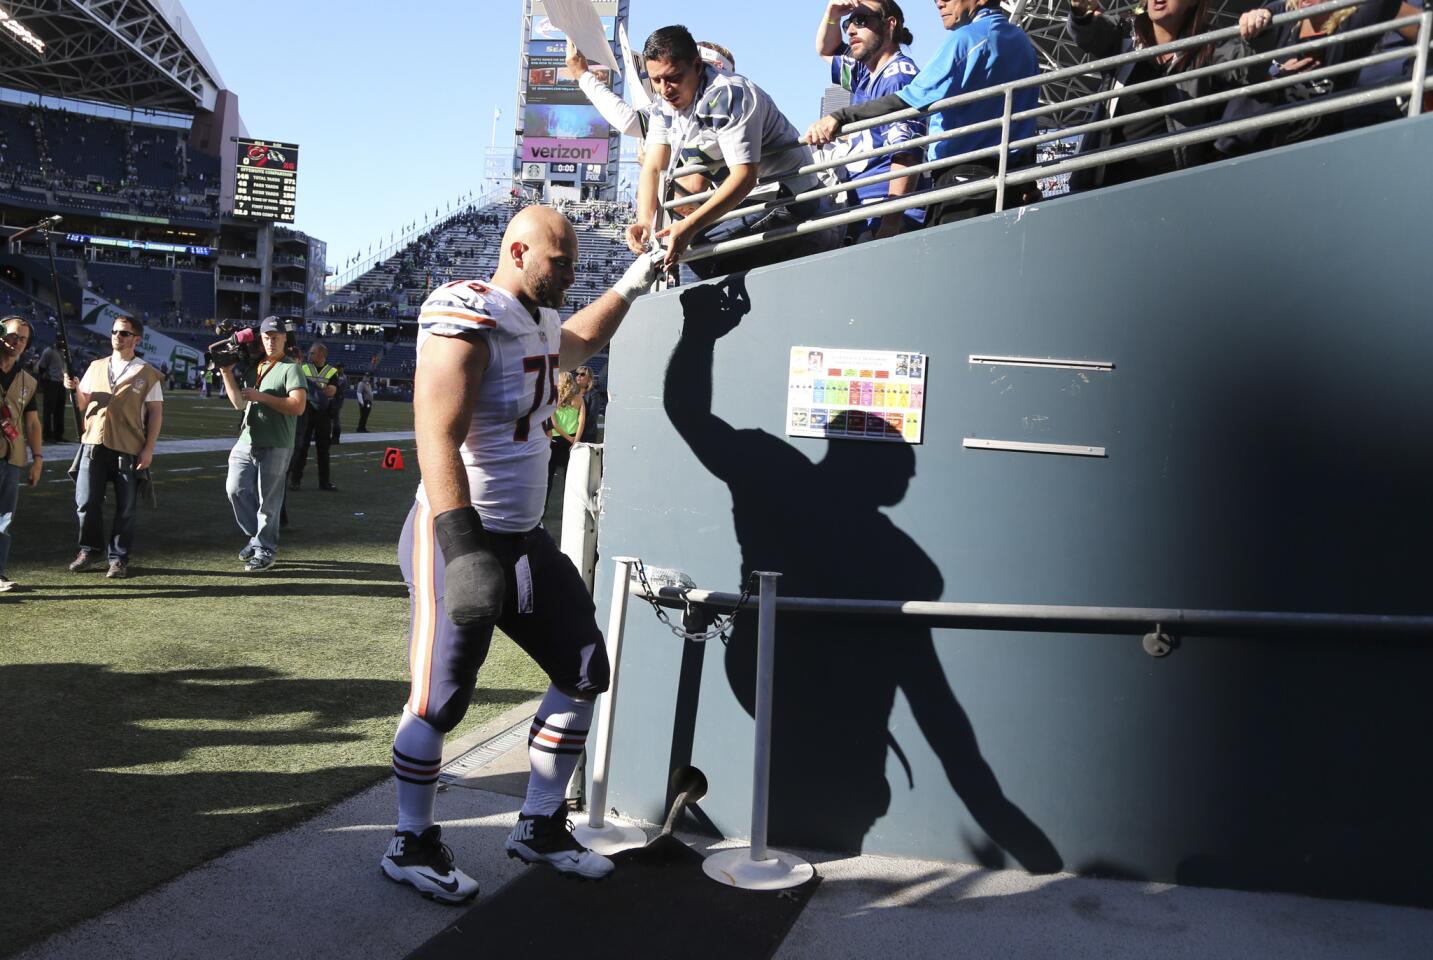 Kyle Long heads to the locker rooms following his team's 26-0 loss.